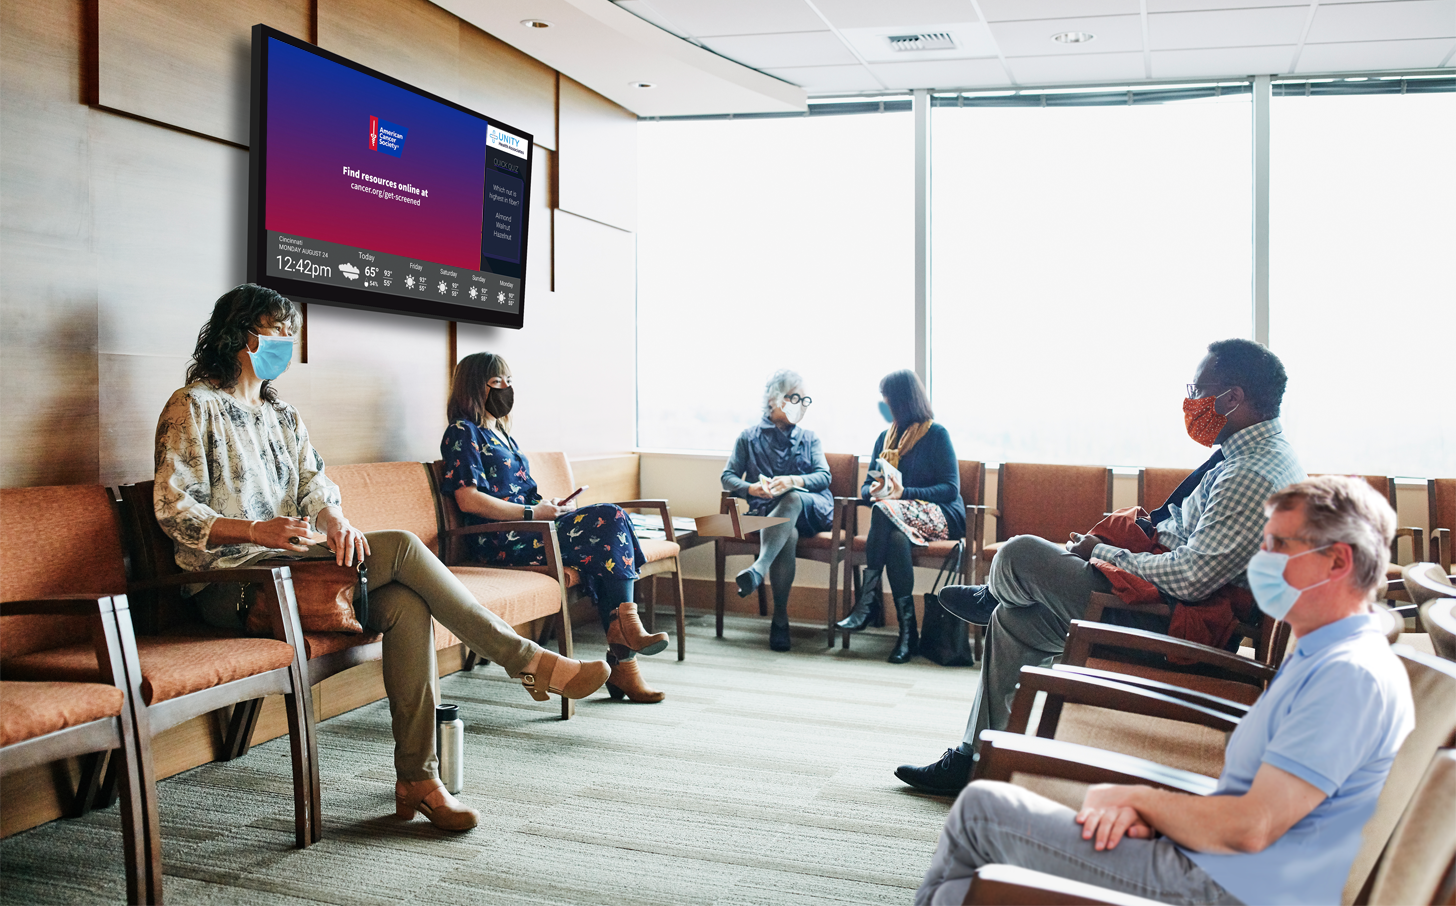 Patients sit in a waiting room observing American Cancer Society content about the importance of regular screenings.